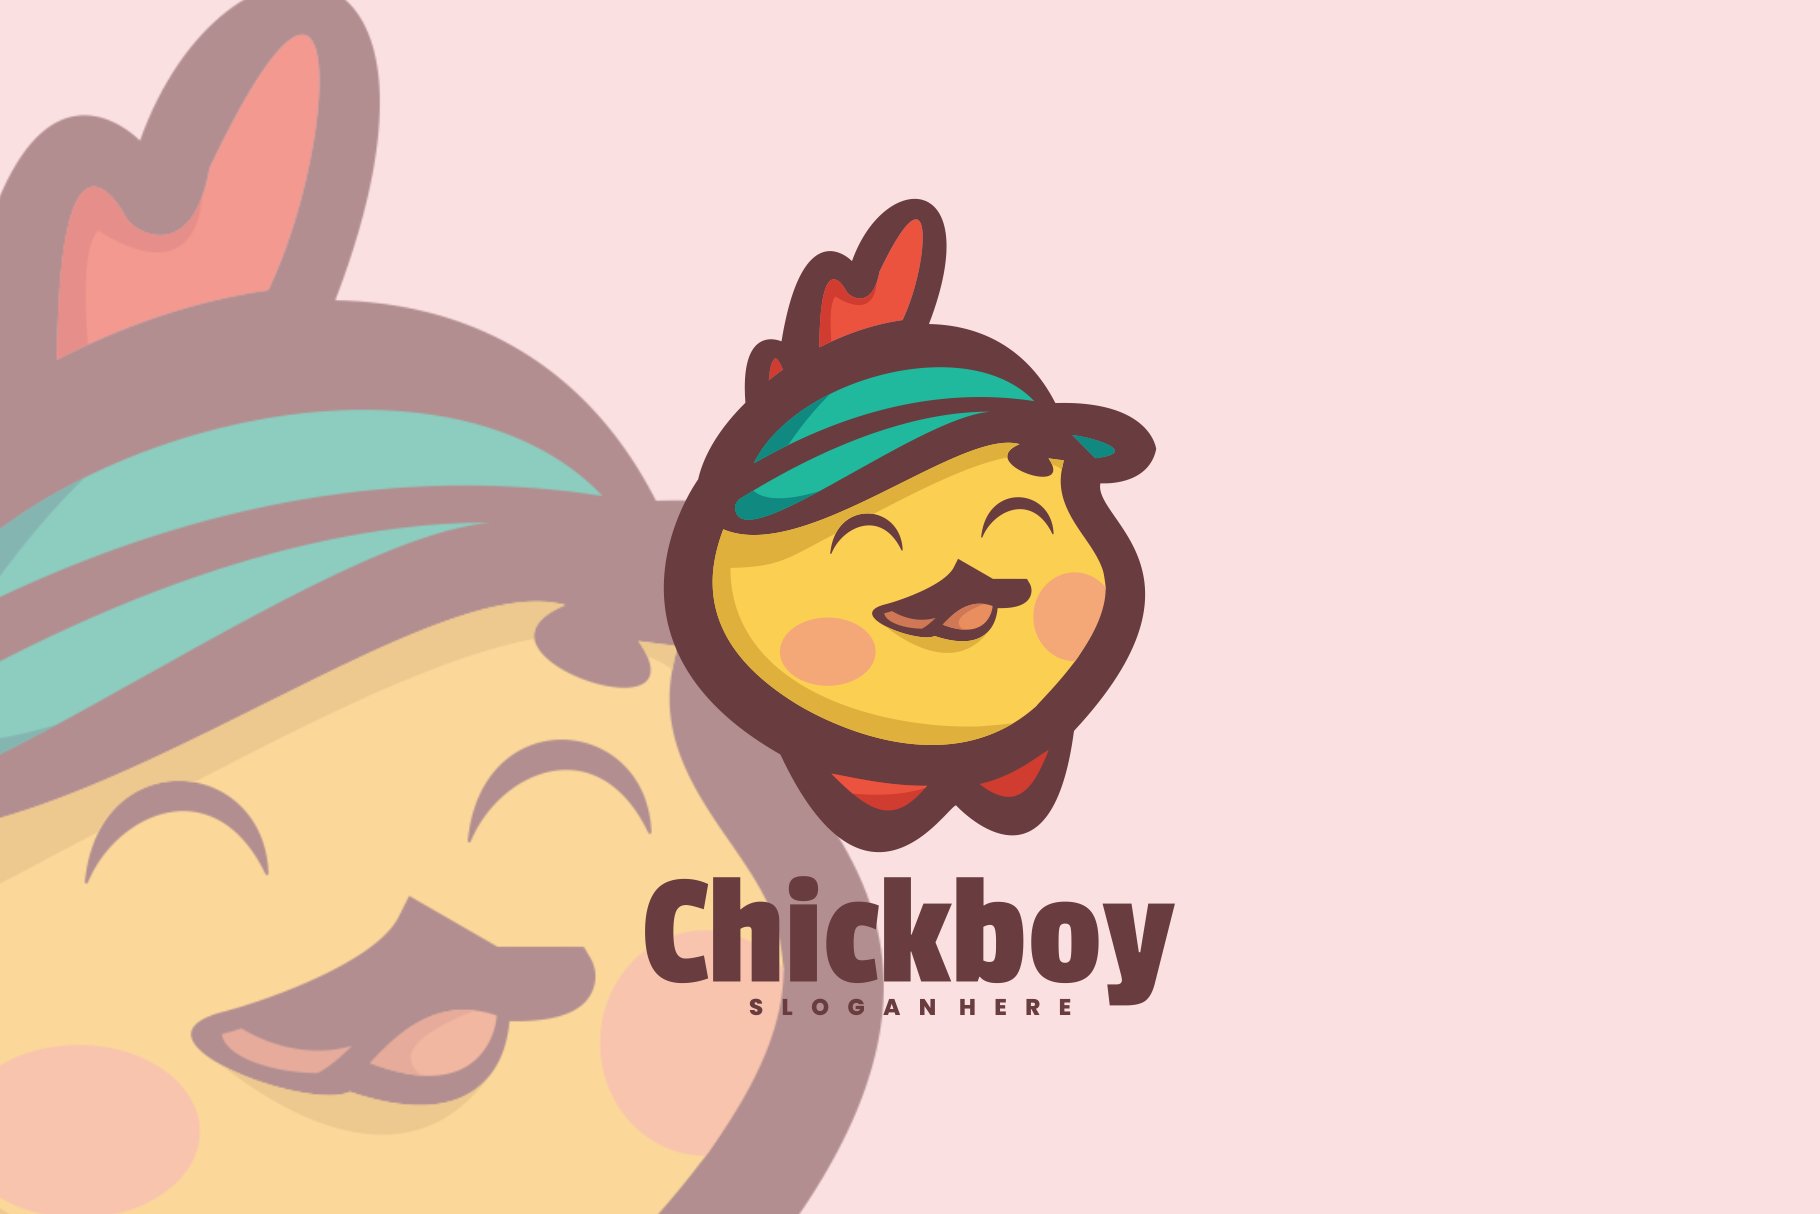 Chickboy Logo Vector cover image.